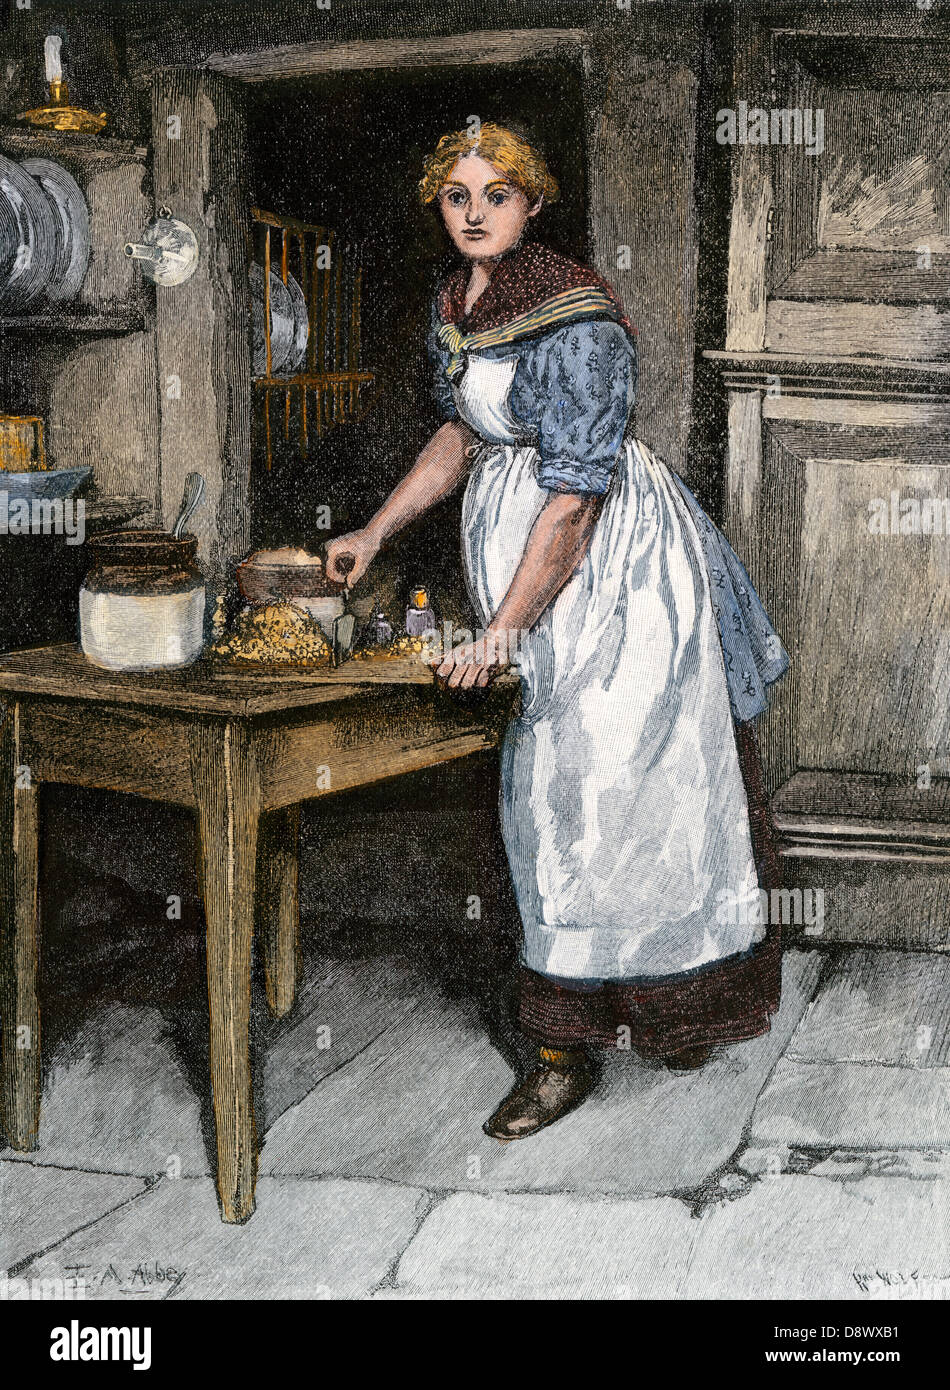 Chopping the ingredients for haggis in Scotland, 1800s. Hand-colored woodcut of an E. A. Abbey illustration Stock Photo